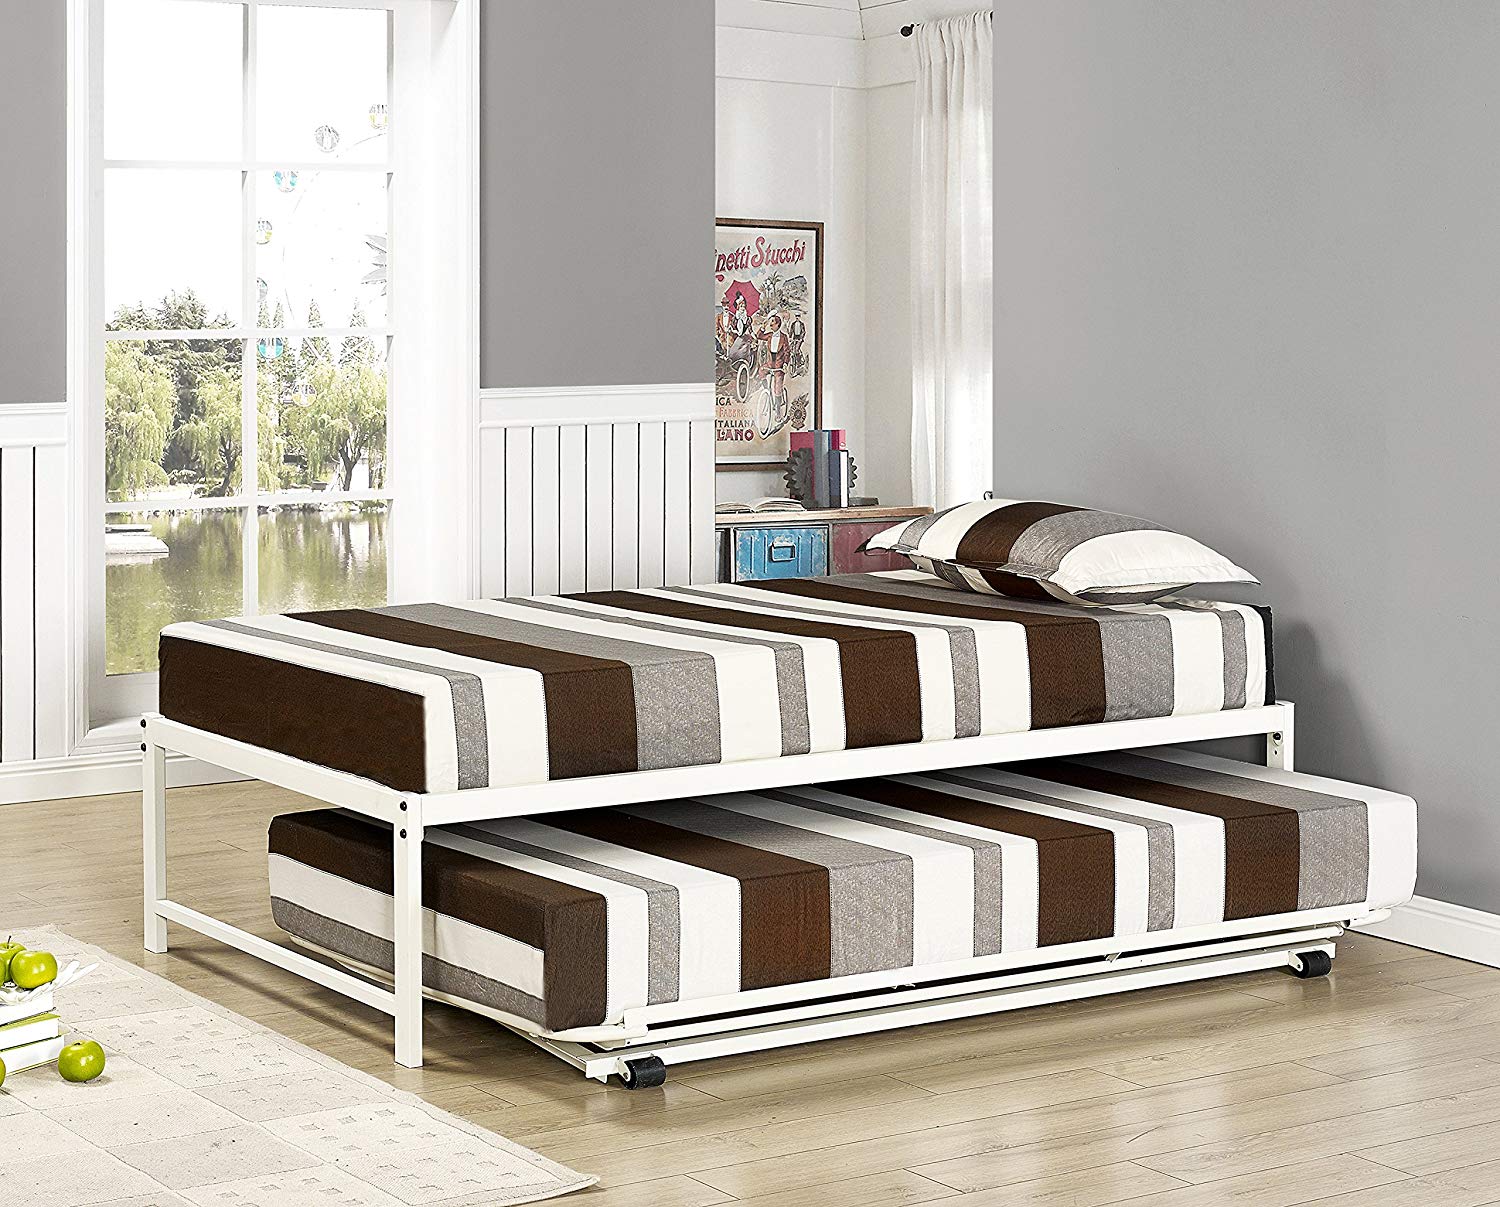 9 Awesome Pop Up Trundle Bed Twin To King For Your Home – AprylAnn